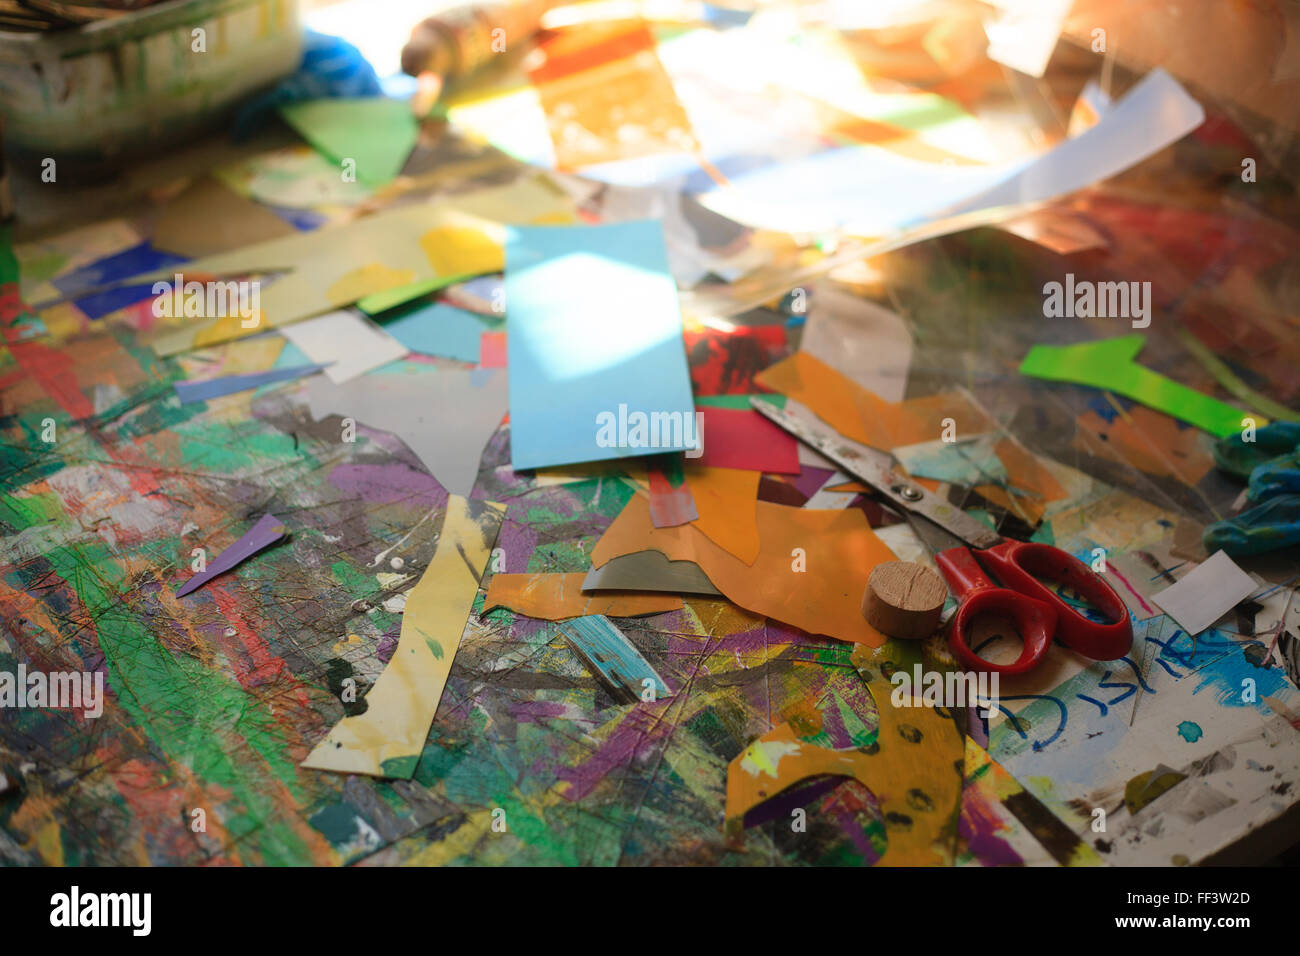 Paper, scissors and other materials in an artist's studio. Stock Photo